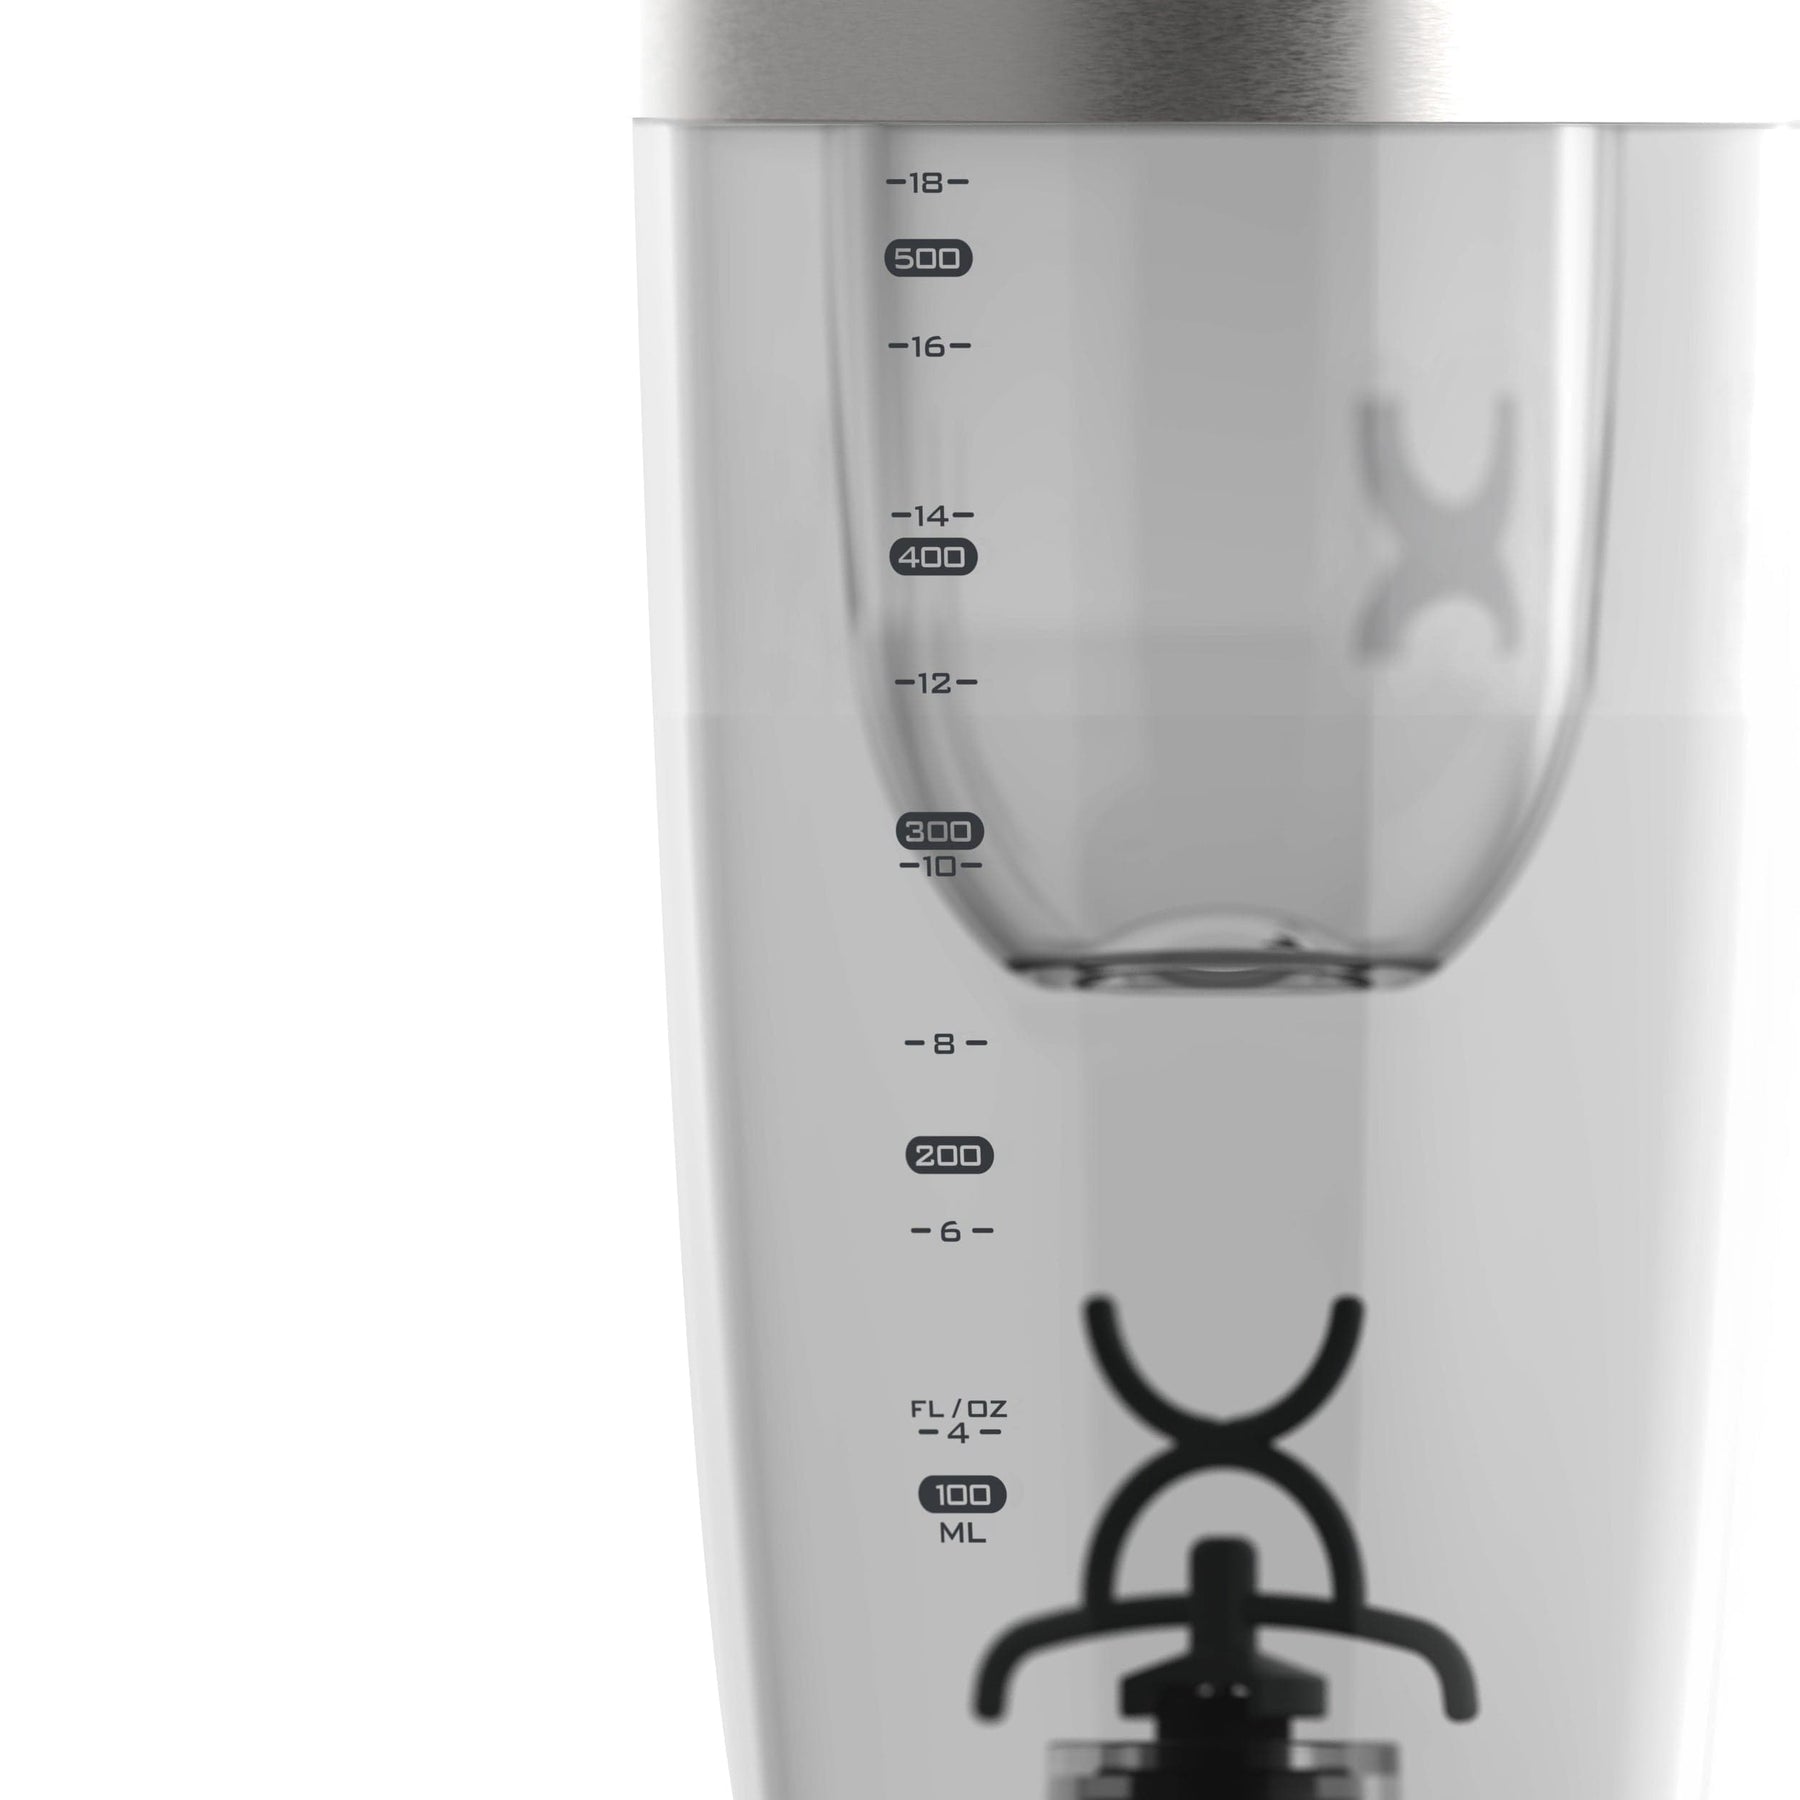 PROMiXX 2.0 (2018 Model) Rechargeable Stainless-steel (Trim